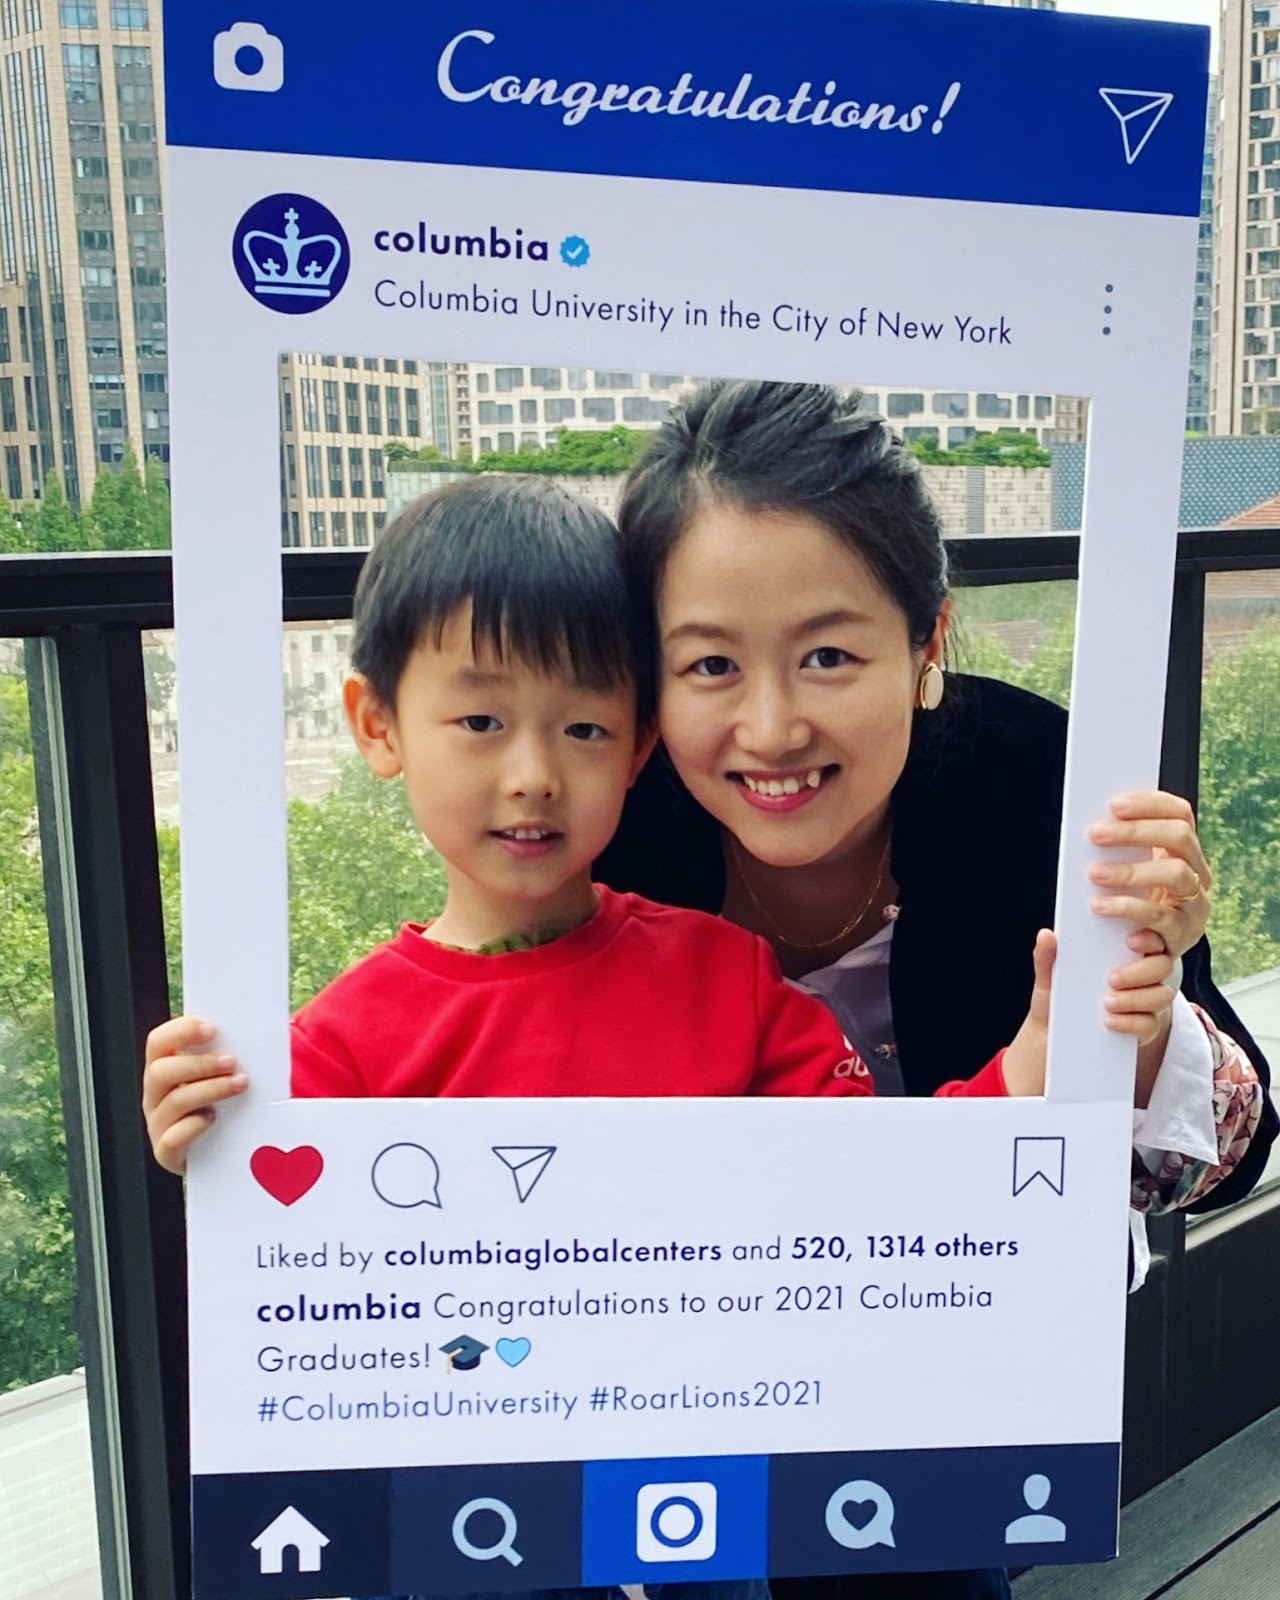 A Columbia grad poses with a young boy in an instagram cutout. 